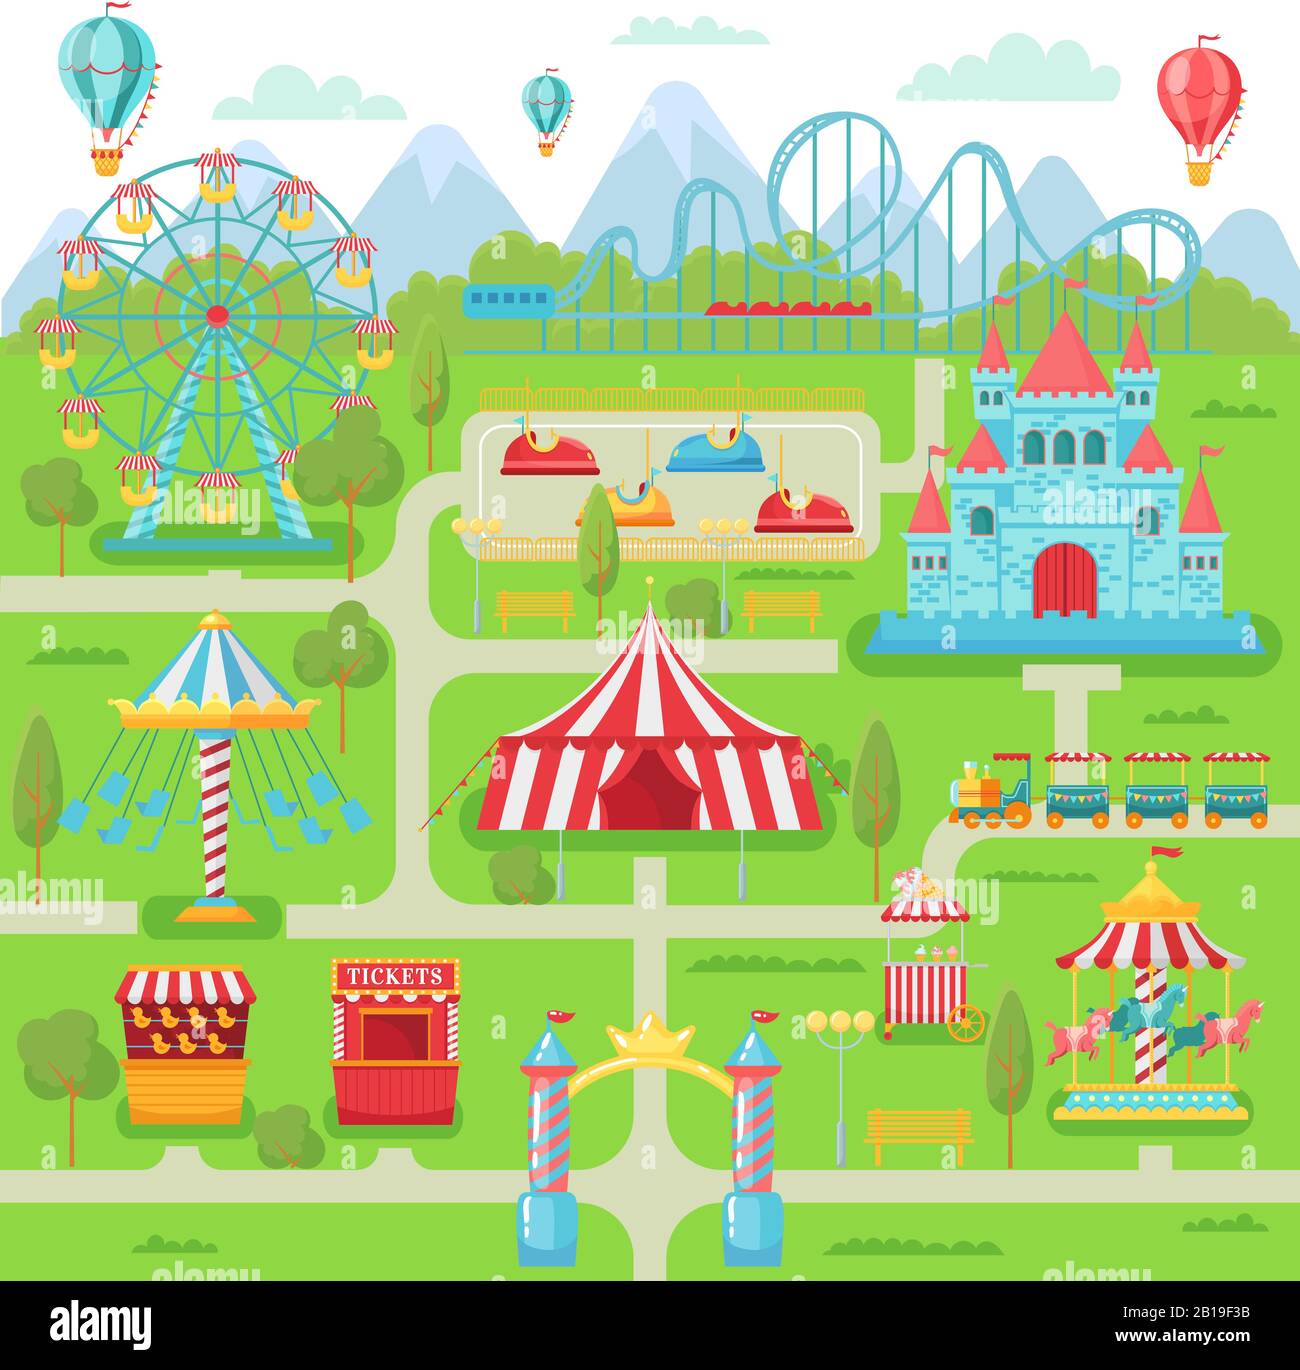 Amusement park map. Family entertainment festival attractions carousel, roller coaster and ferris wheel vector illustration Stock Vector